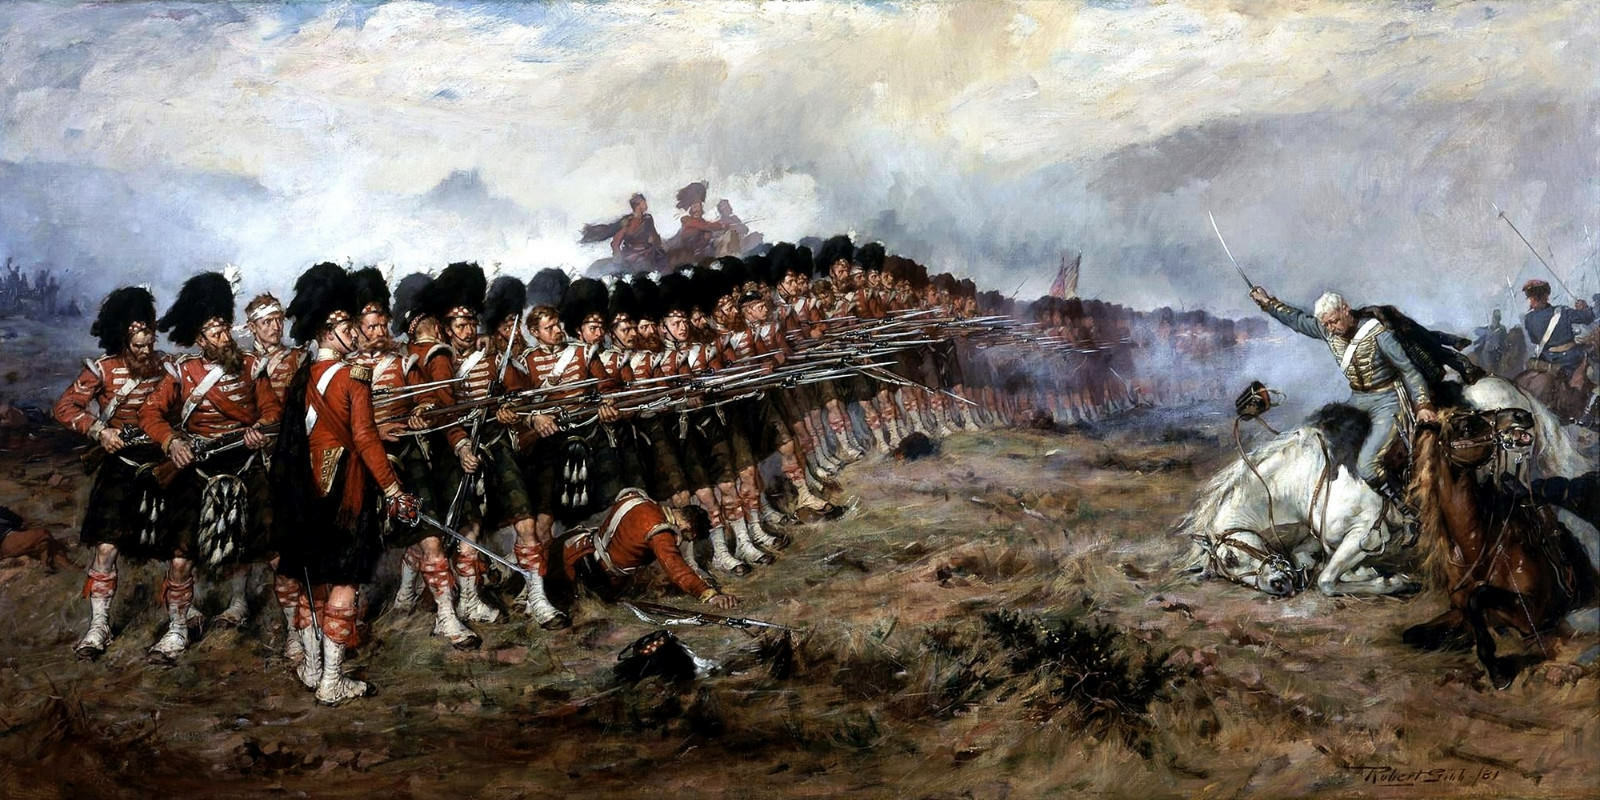 The Thin Red Line Battle of Balaclava Painting by Robert Gibb Art Reproduction - $32.99 - $63.99